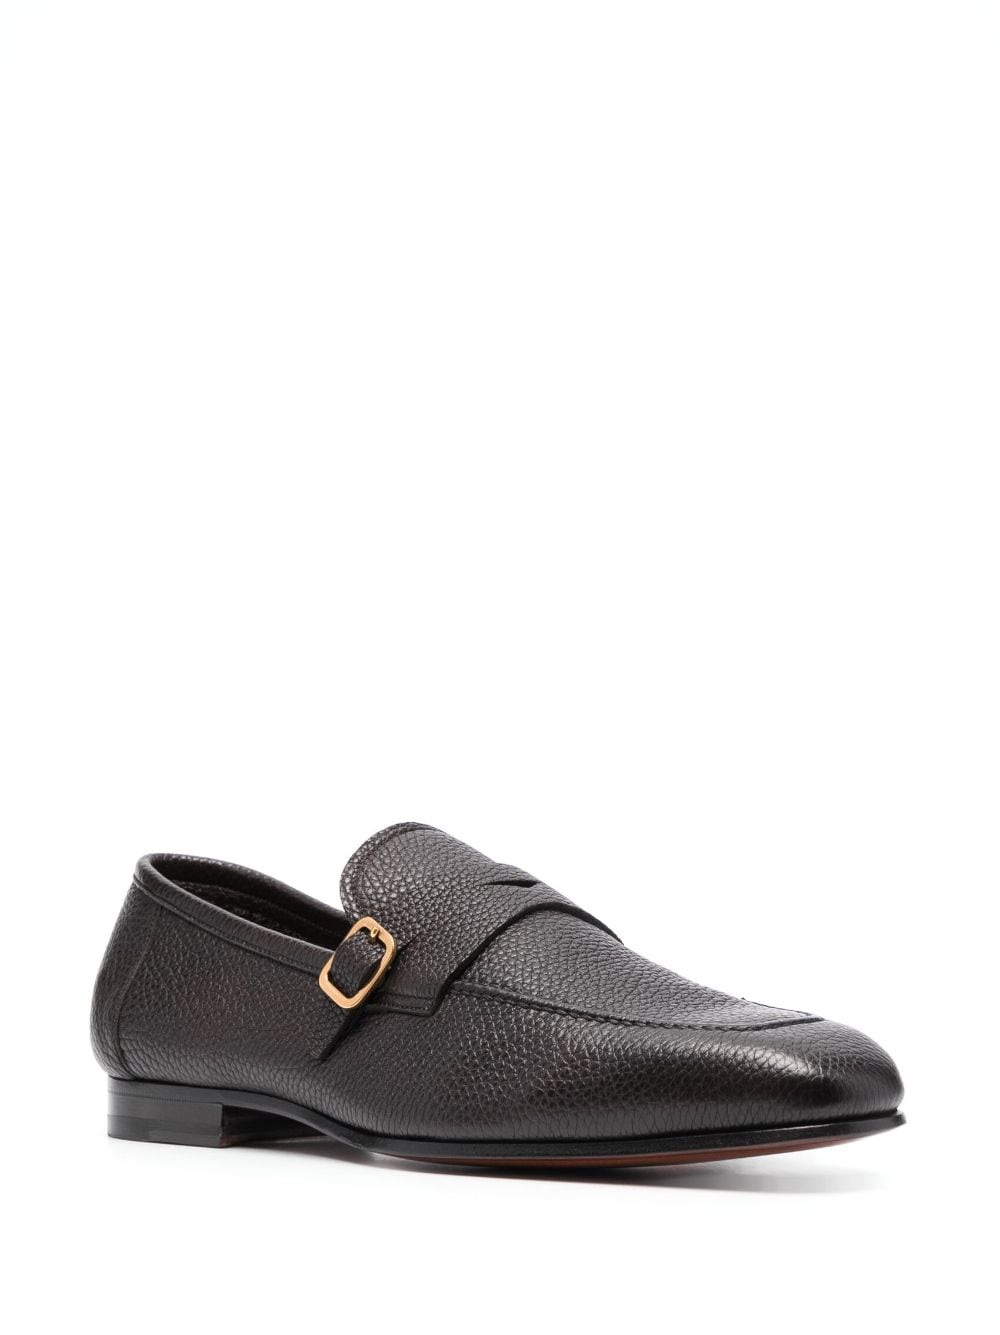 TOM FORD Grained square-toe Loafers - Farfetch